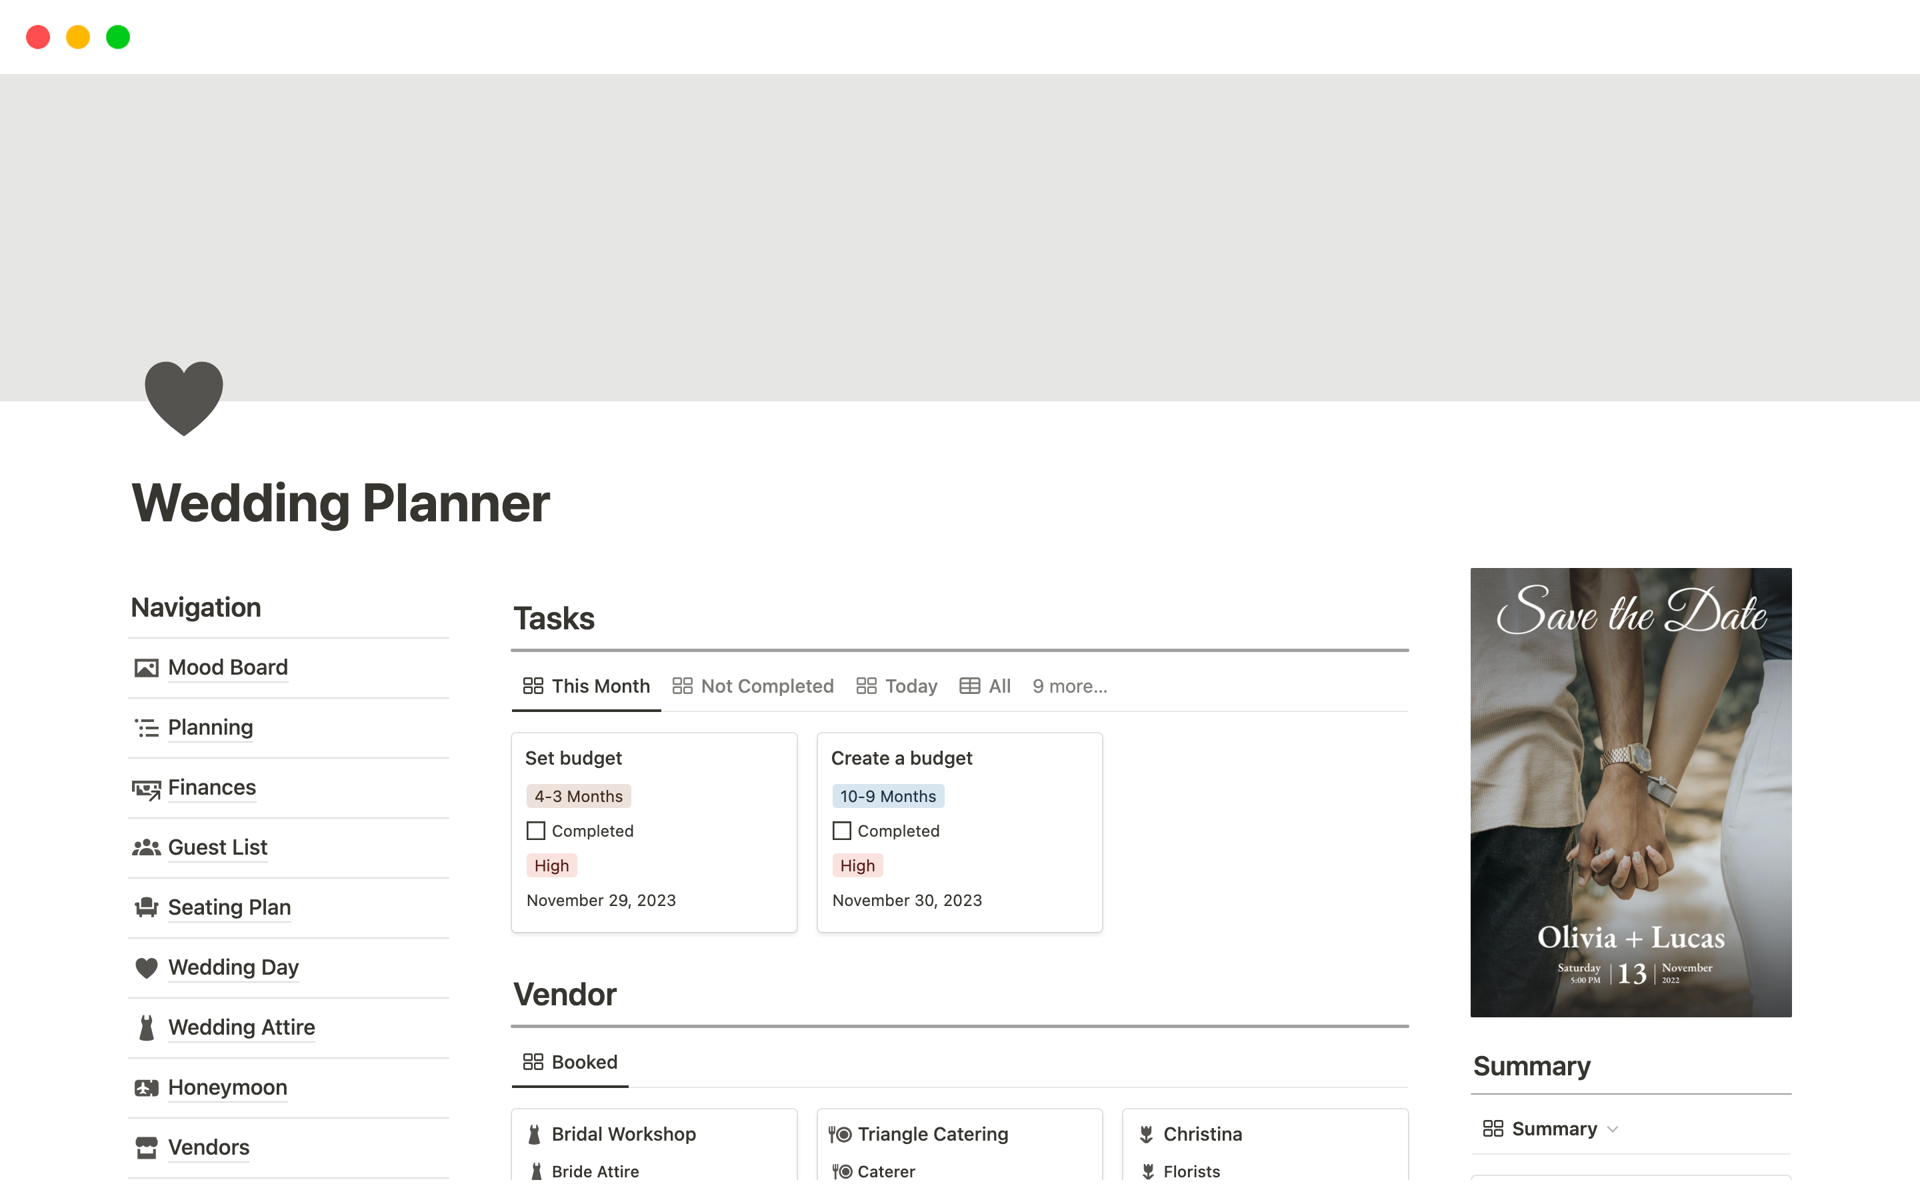 This wedding planner is designed to help you keep track of all important information such as guest lists, vendor contacts, timelines, to-do lists, and more.